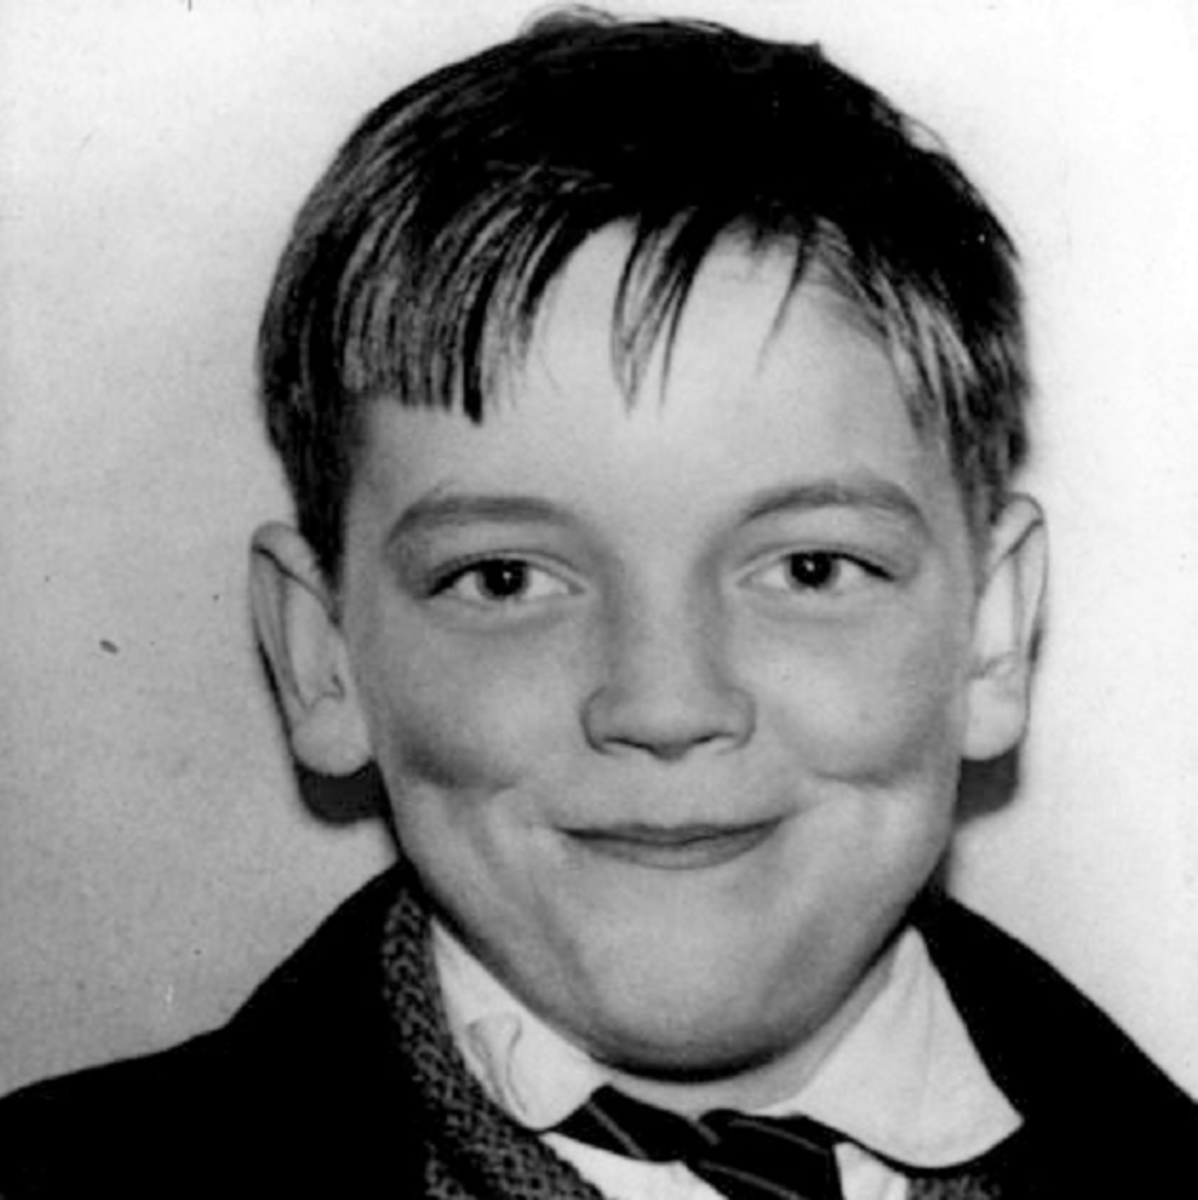 The Moors Murderers second victim, 12yr old John Kilbride, whom whilst eating broken biscuits bought with his pocket money, was lured to his death by Myra Hindley